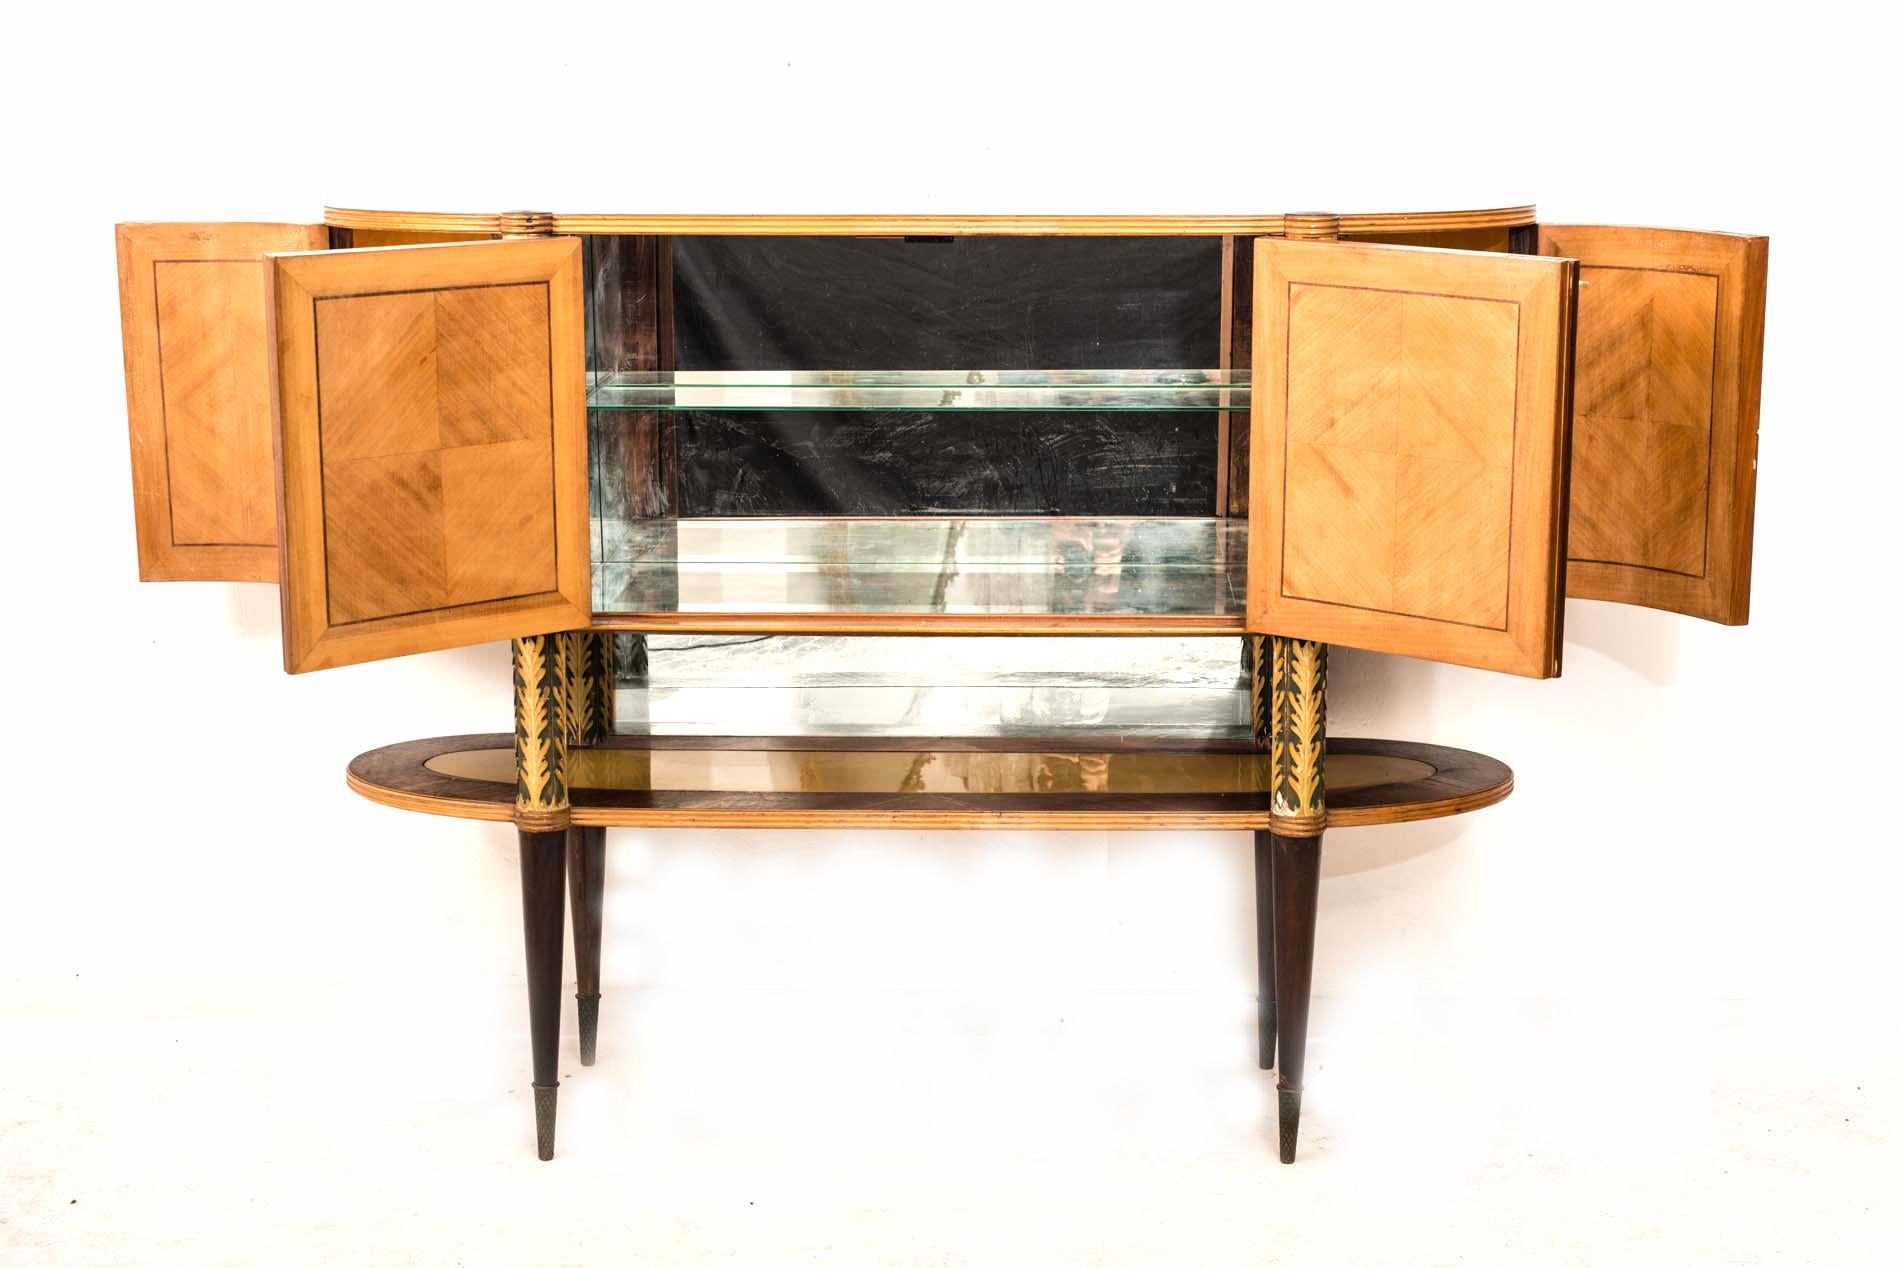 Midcentury Italian Dining Room Set with Table and Bar Cabinet, 1940 For Sale 5